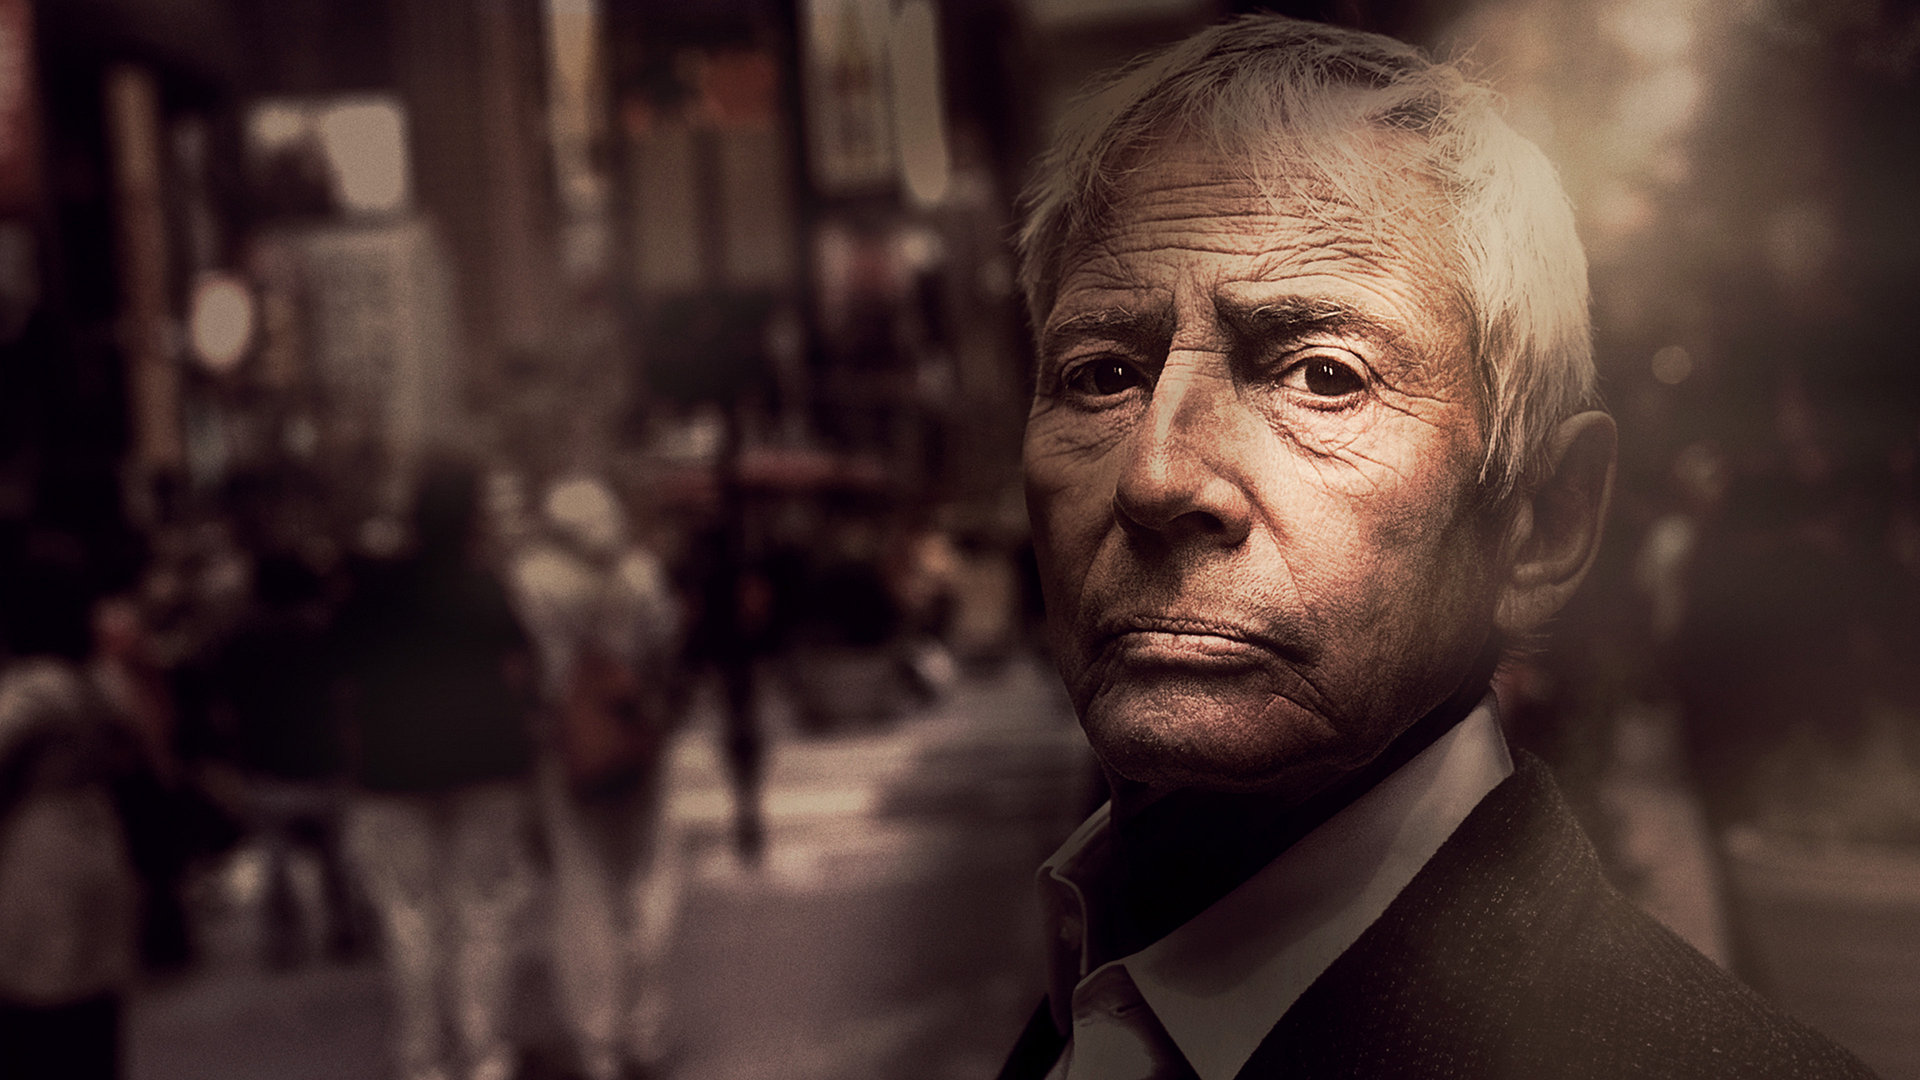 The State of Texas vs. Robert Durst